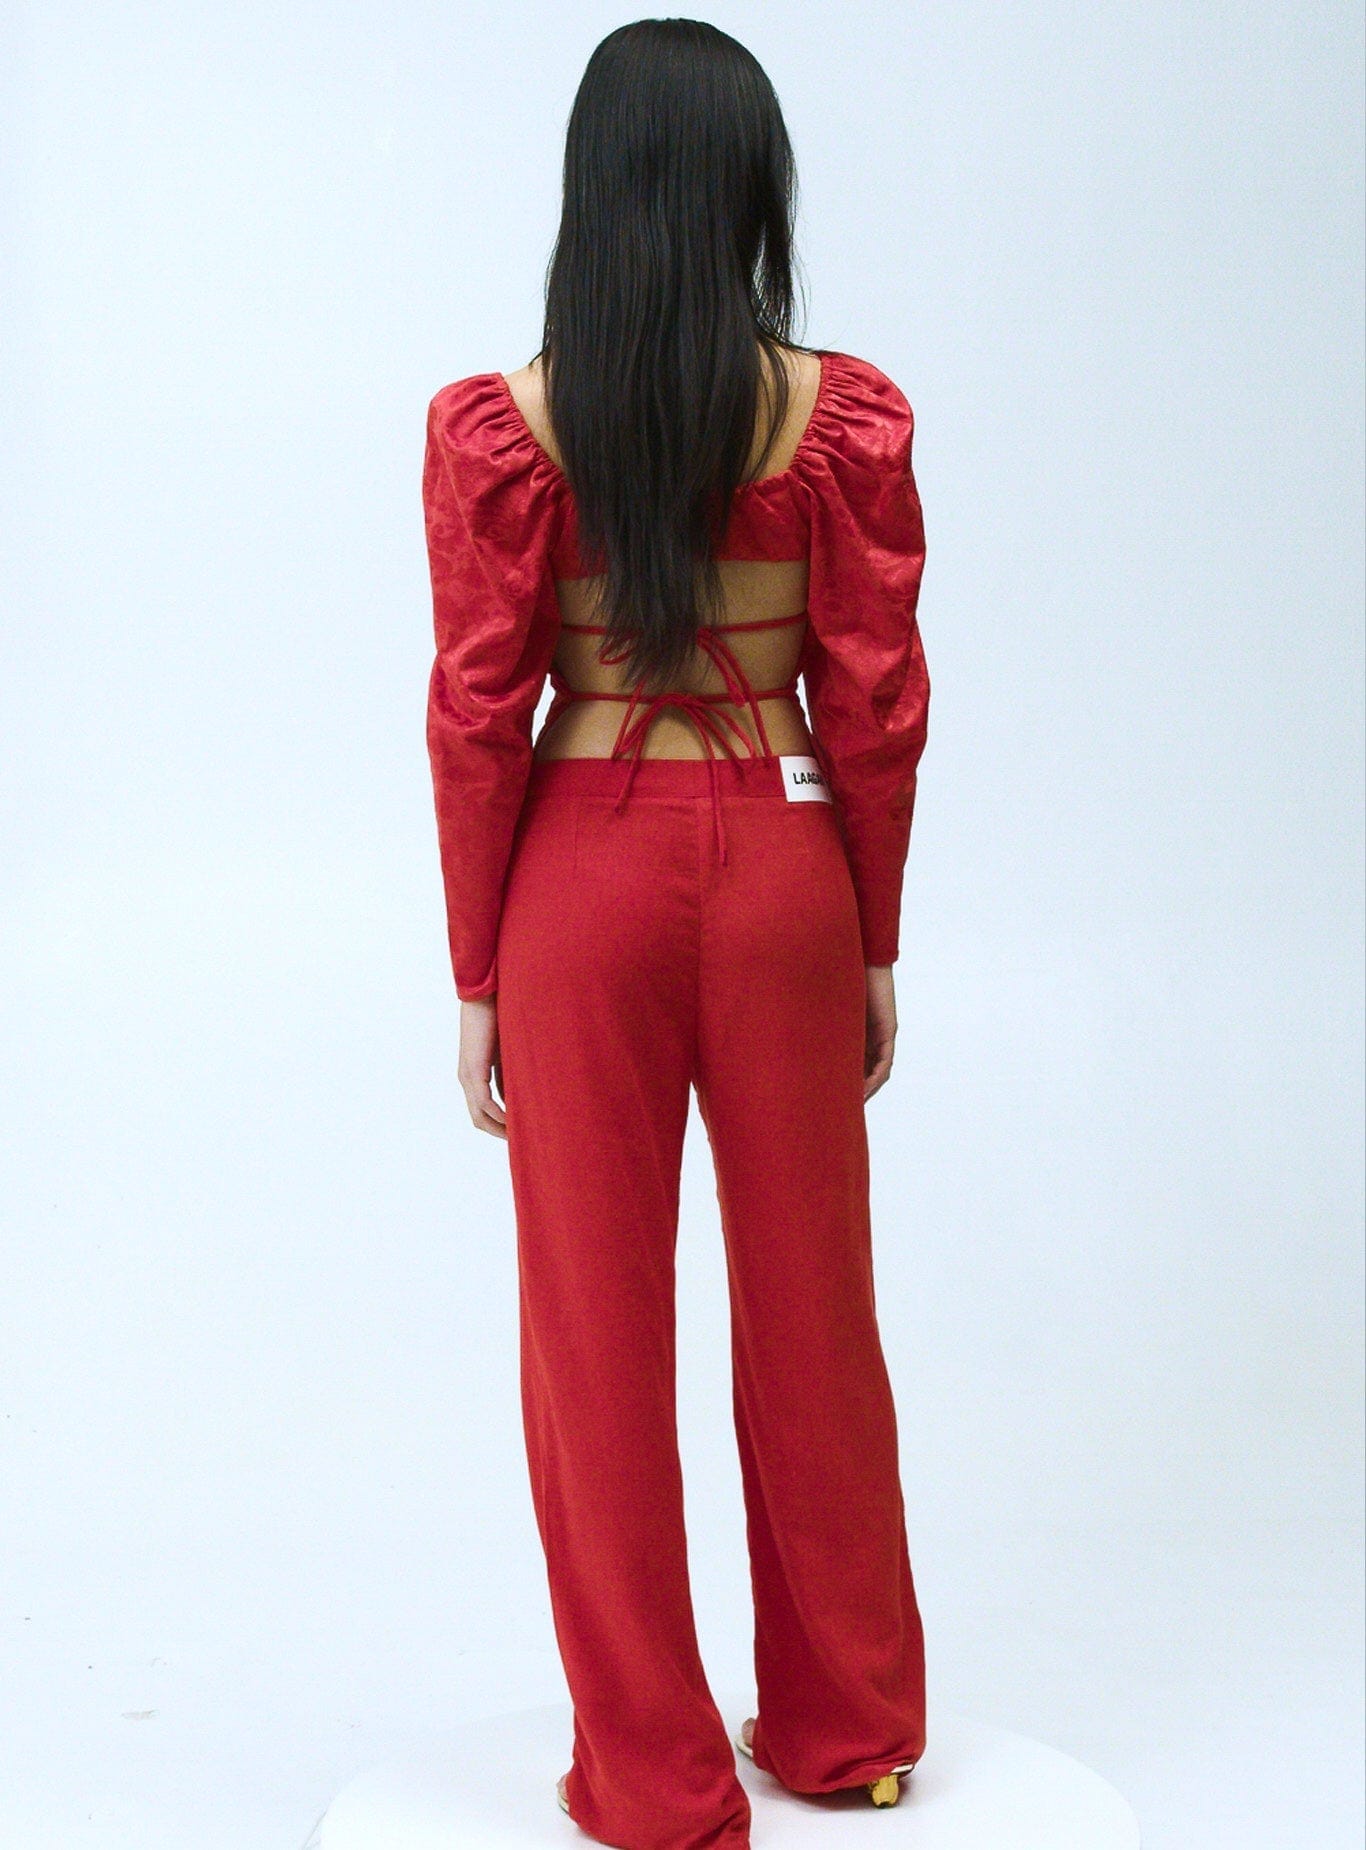 BESO RED LINEN PANTS